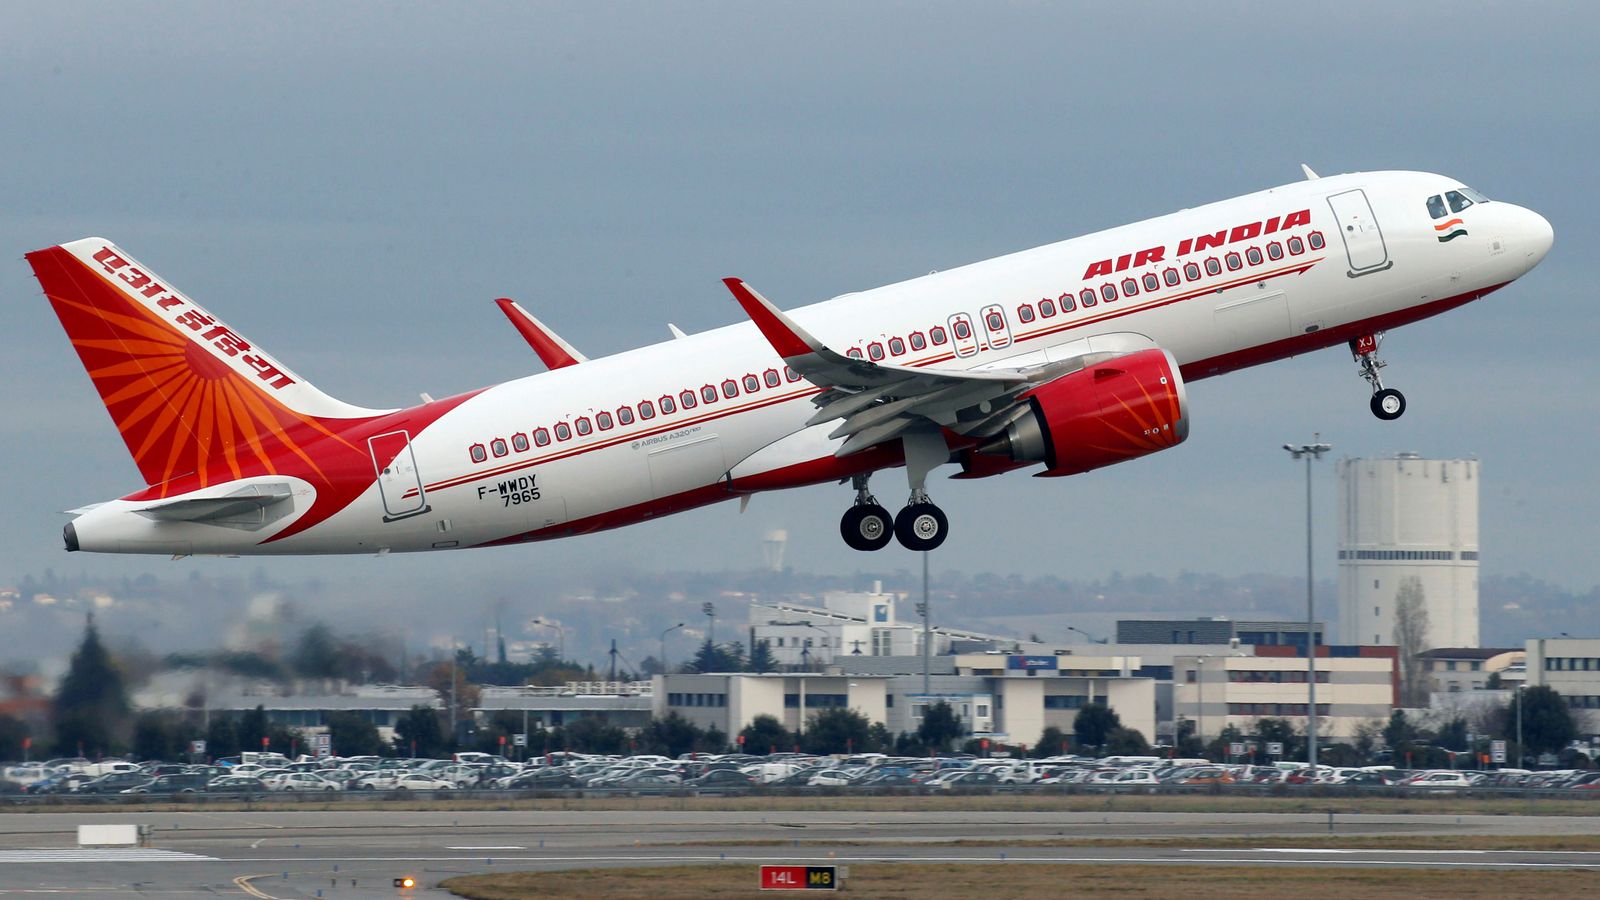 Air India: At least 4.5 million people’s data exposed following IT system hack